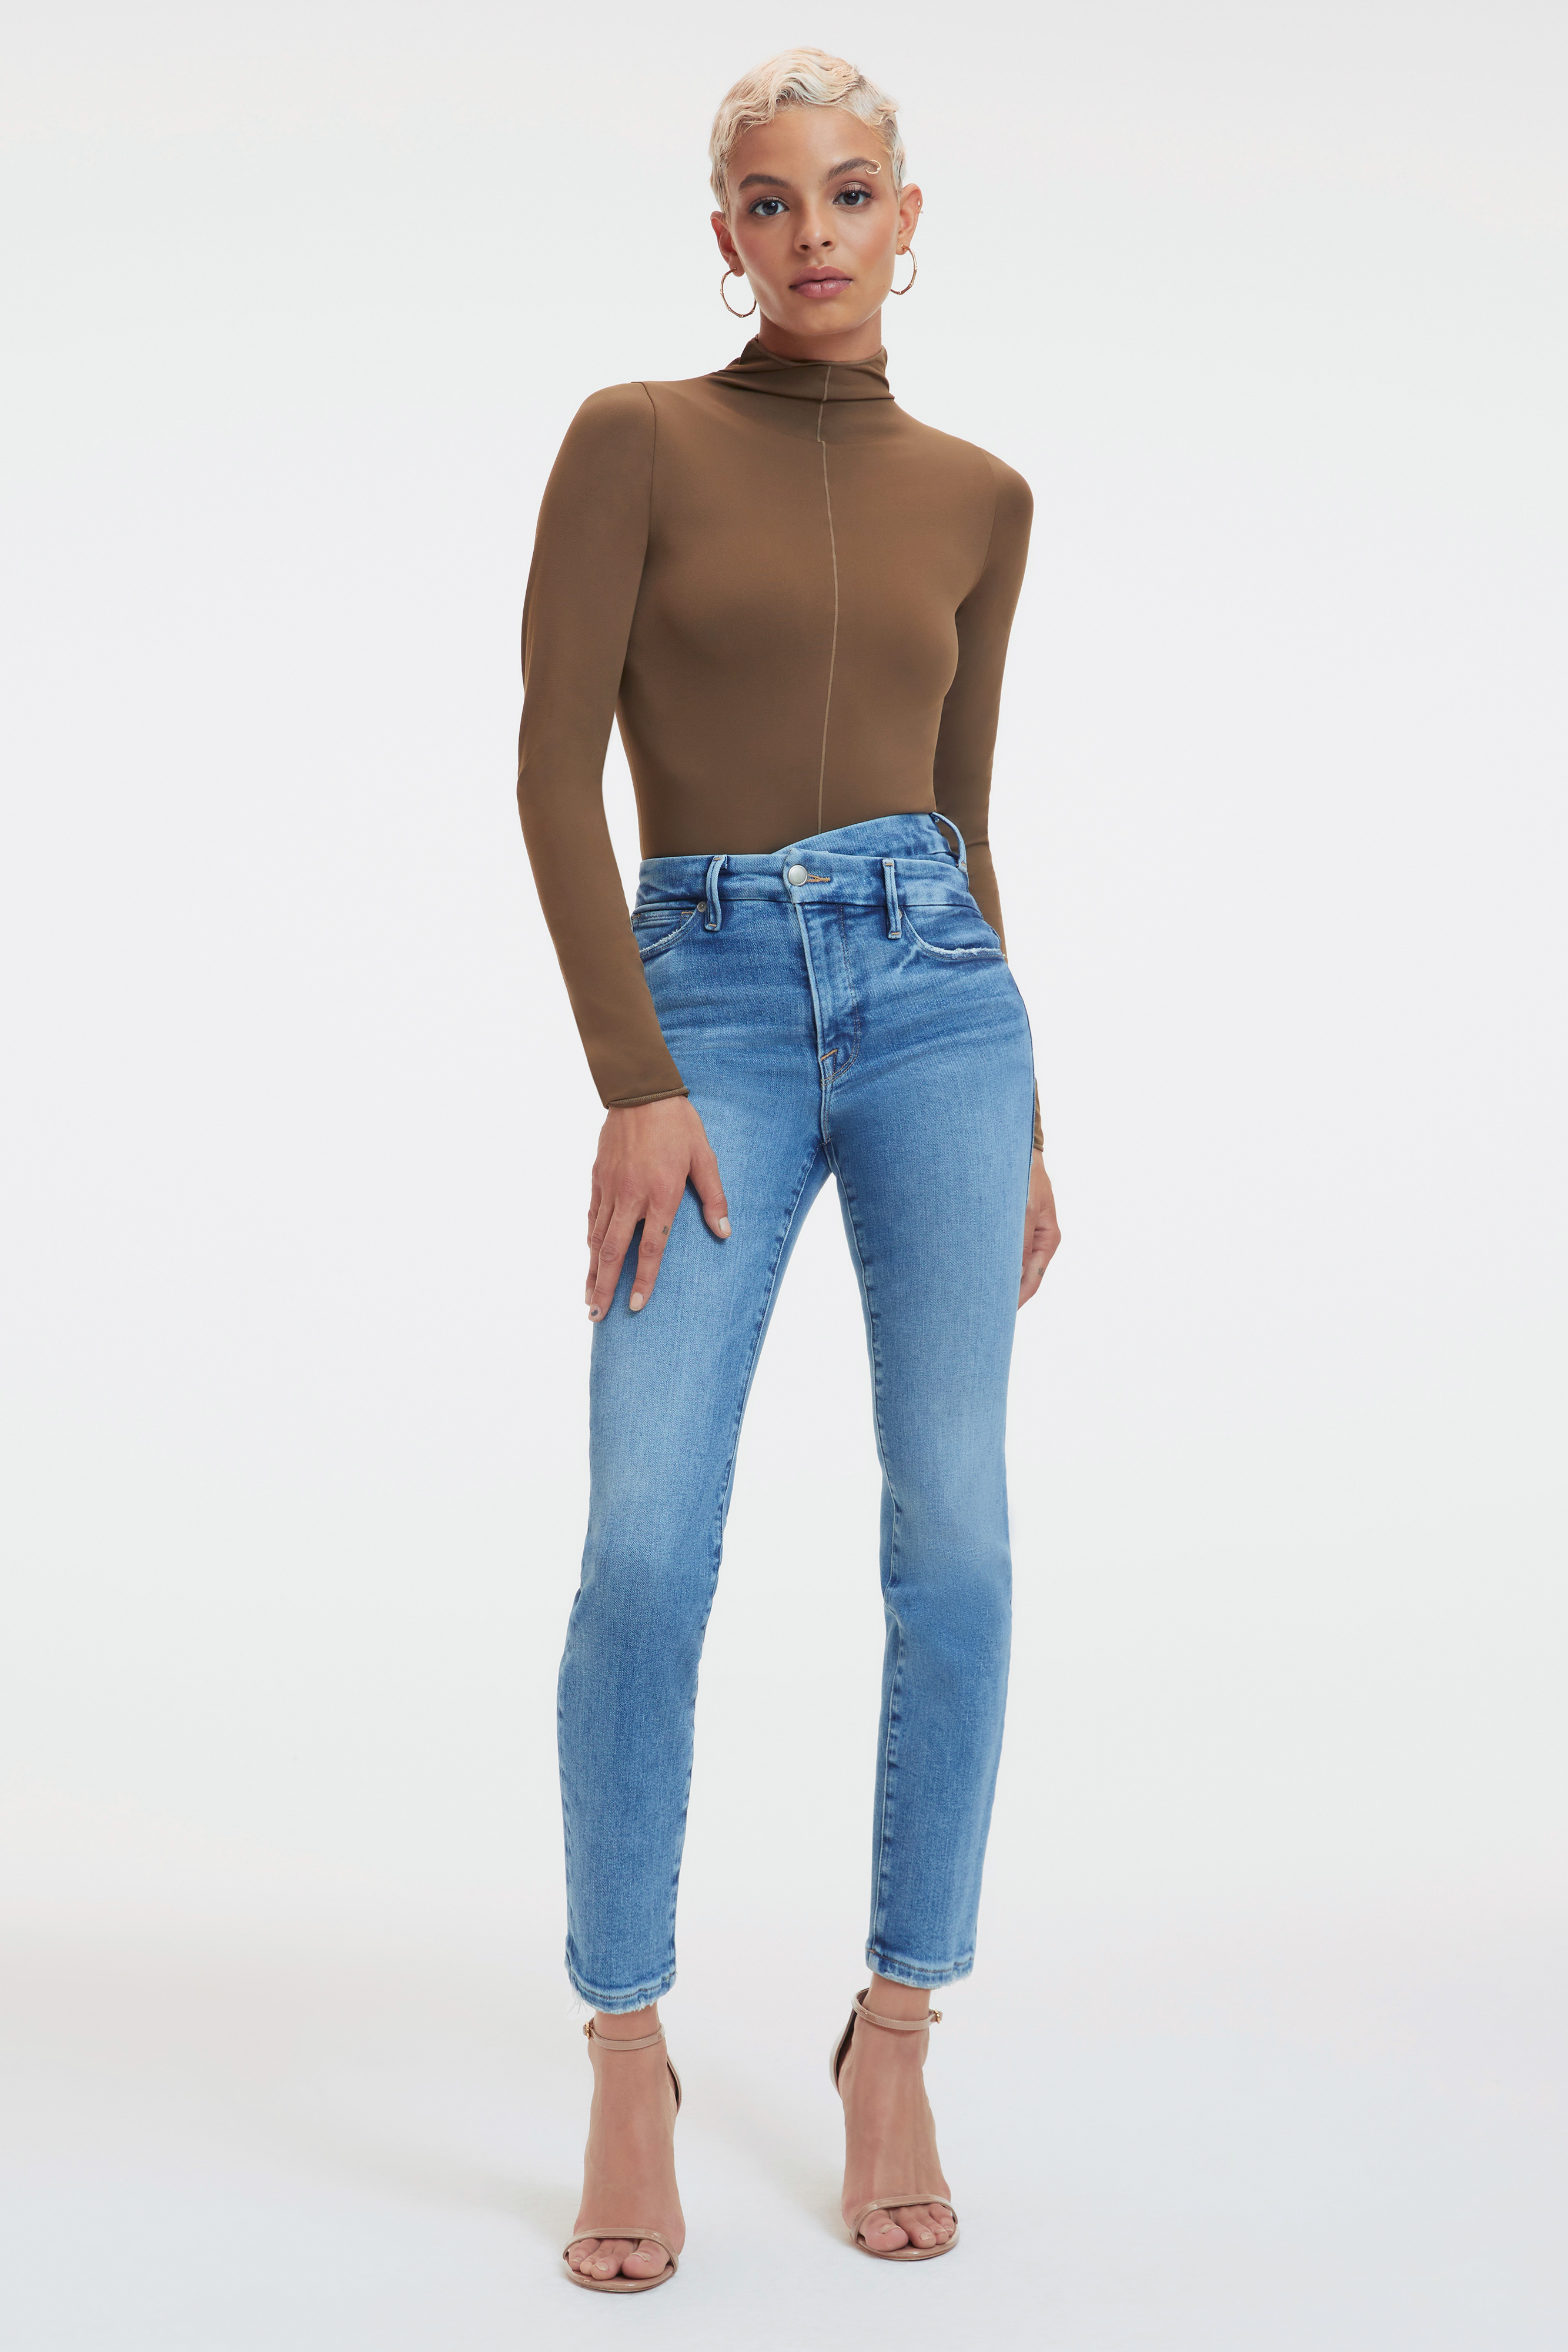 Styled with GOOD CLASSIC SLIM STRAIGHT LIGHT COMPRESSION JEANS | INDIGO268